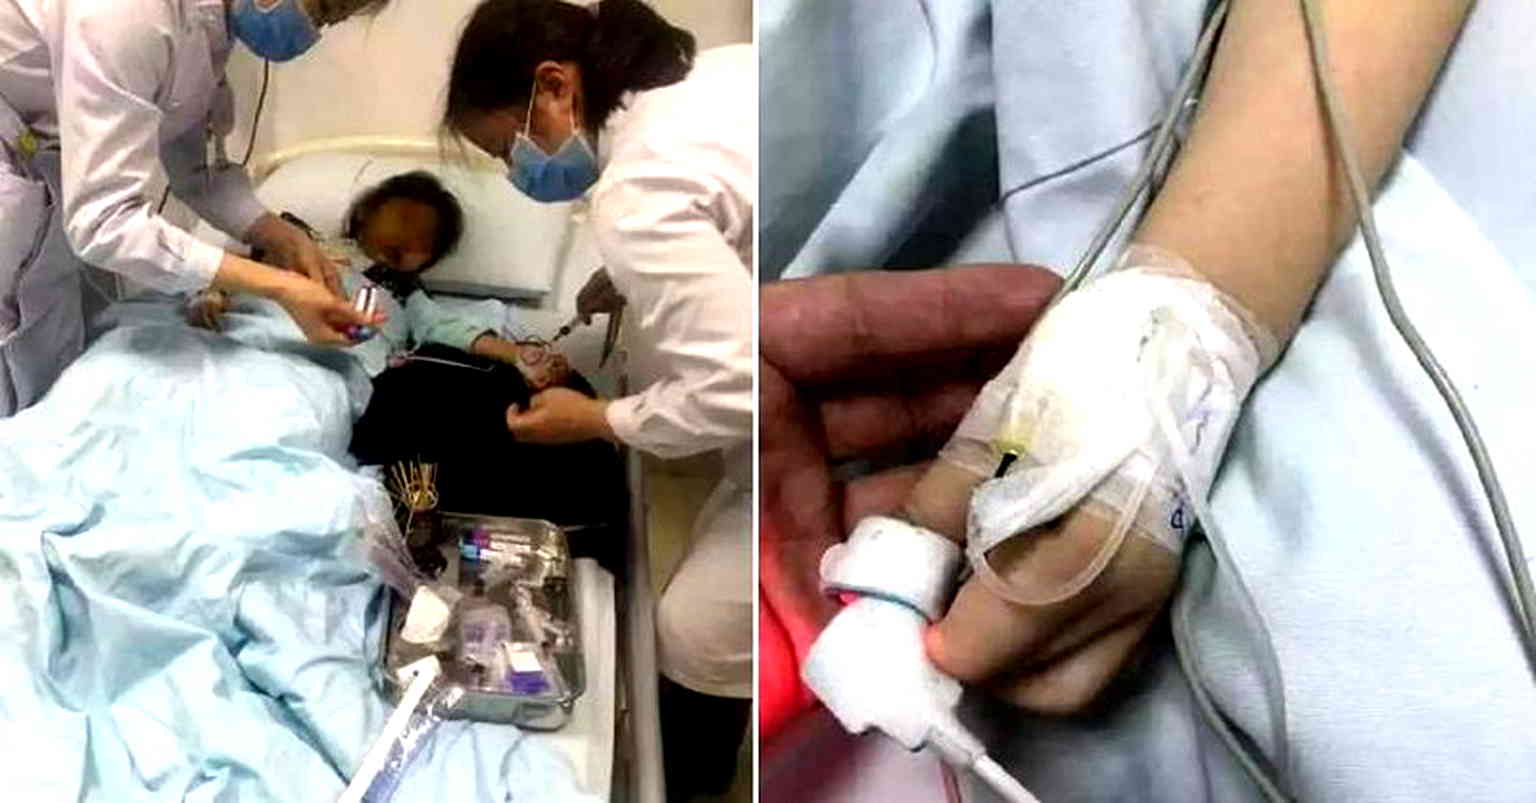 Chinese School Worker Poisons Kids With Schizophrenia Drugs After Not Getting a Raise